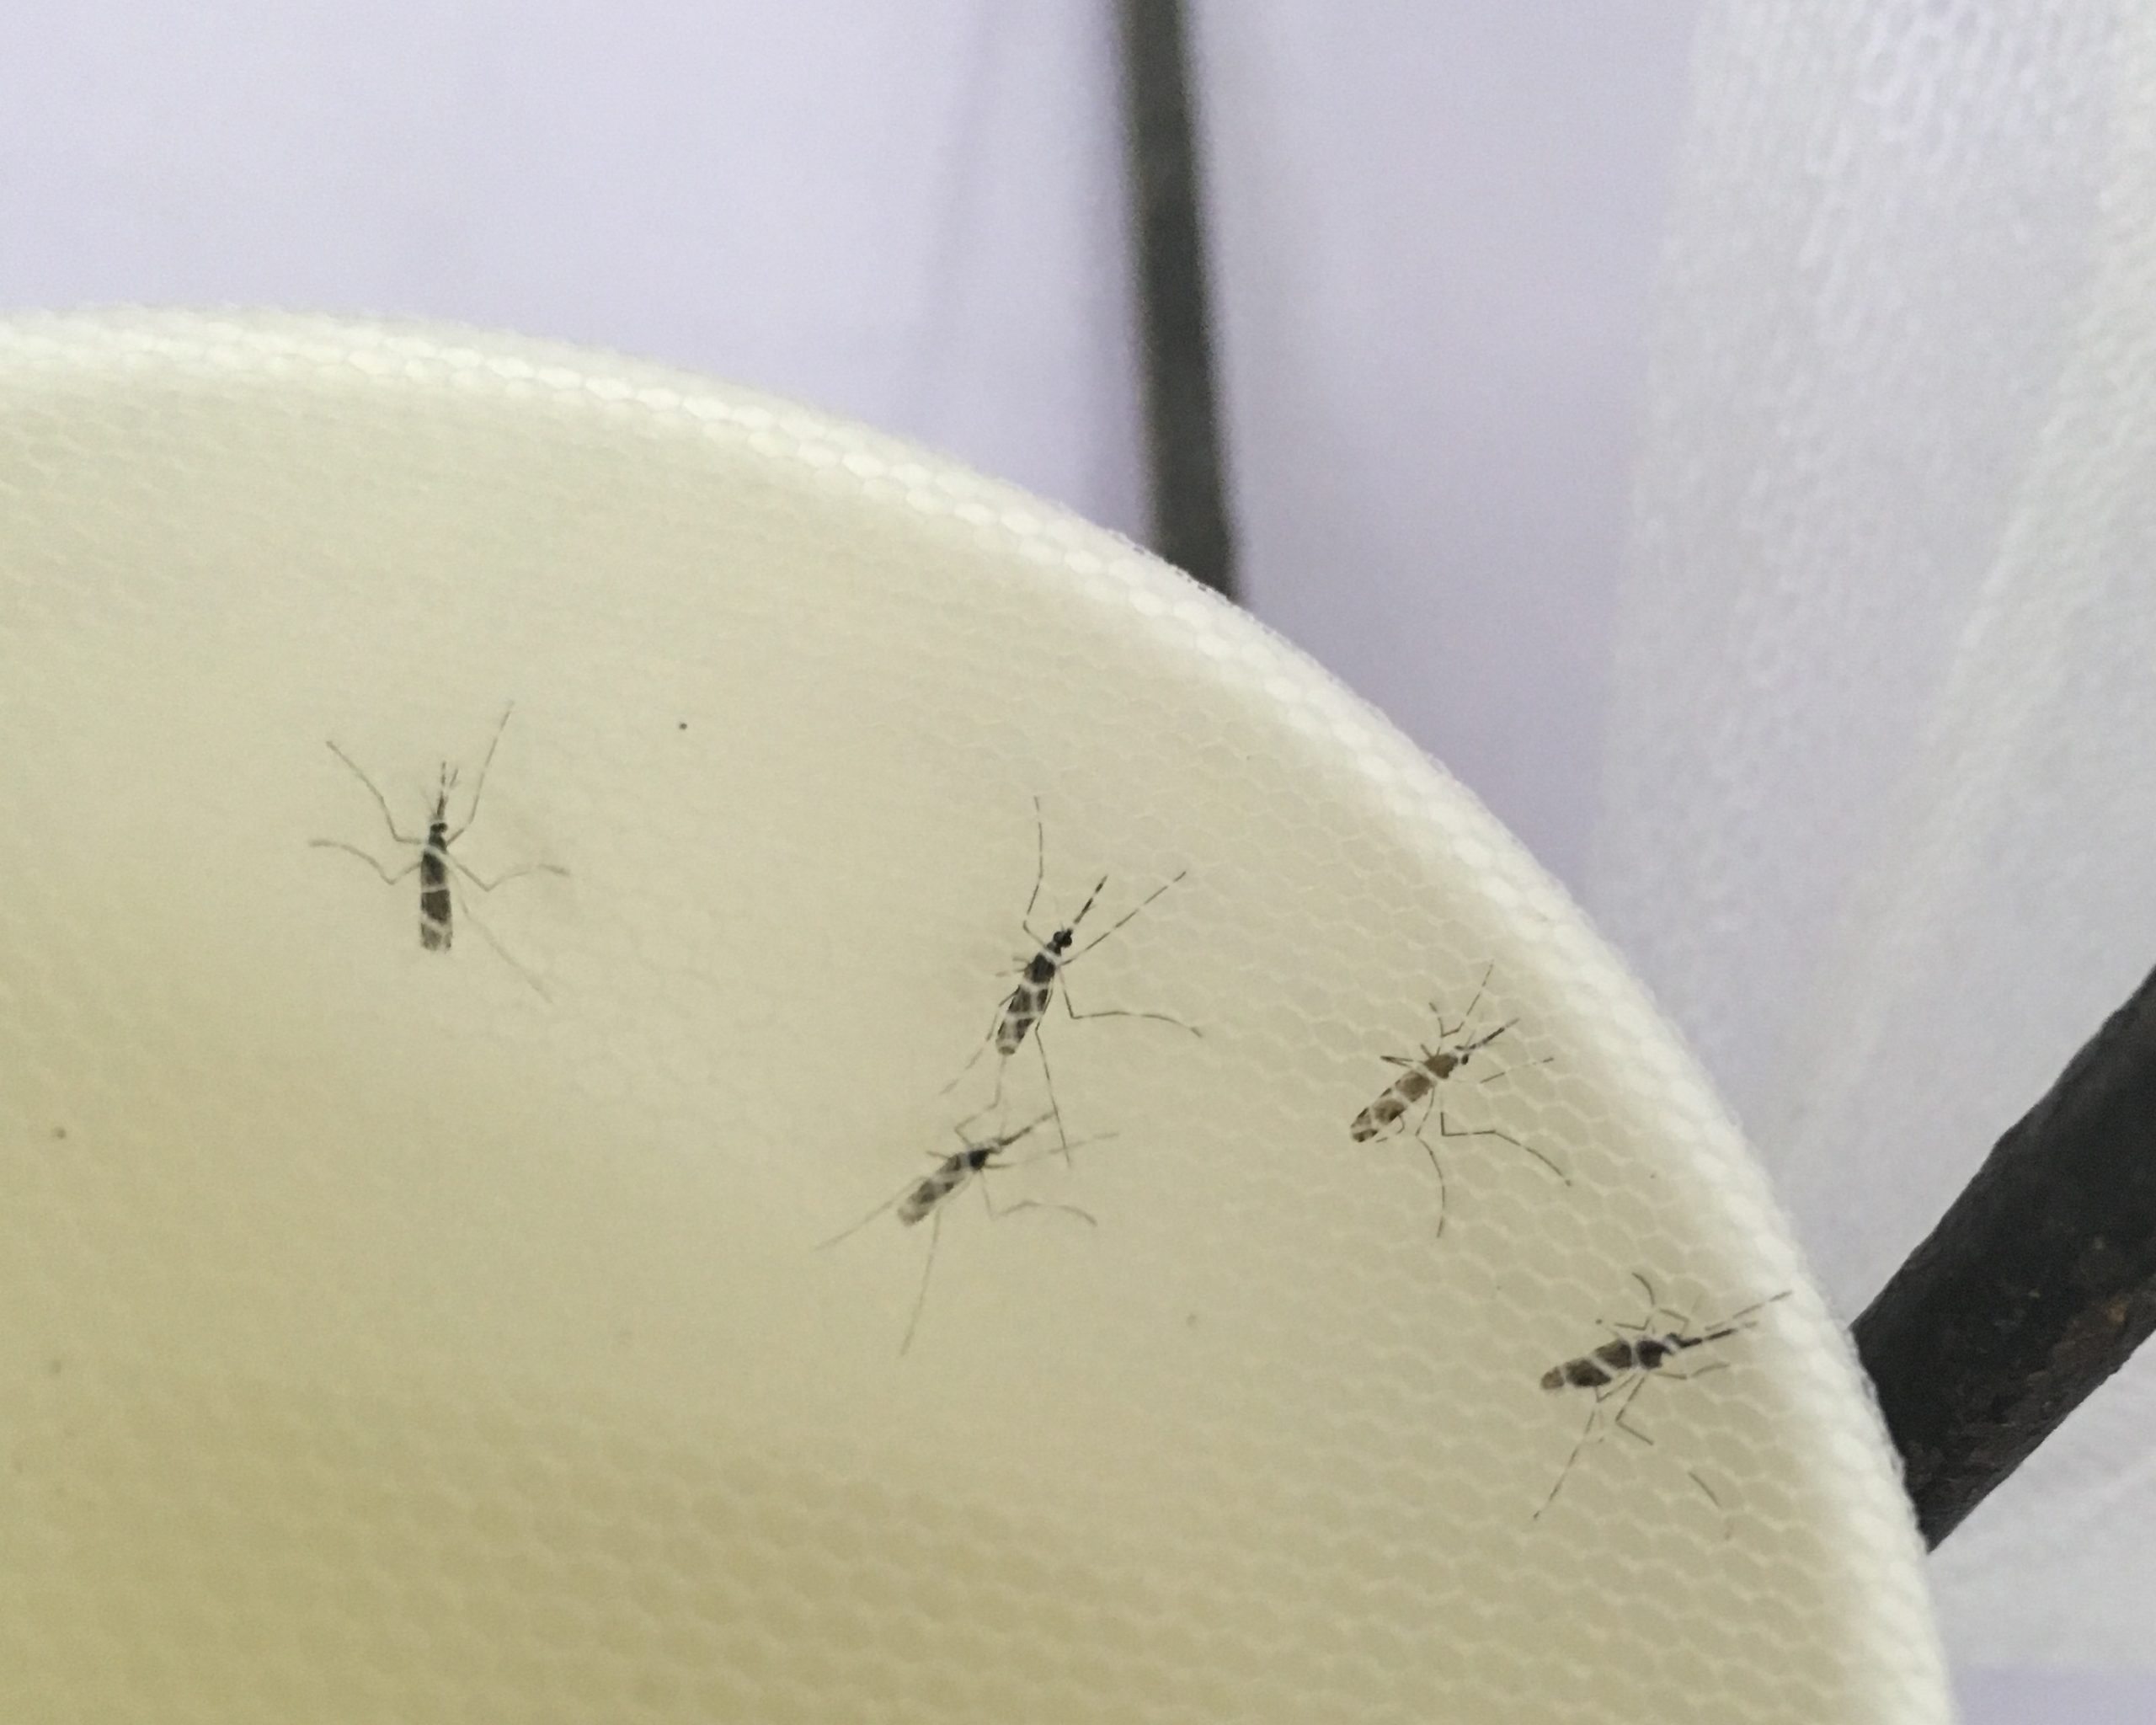 Five mosquitoes inside a paper cup covered in netting for testing